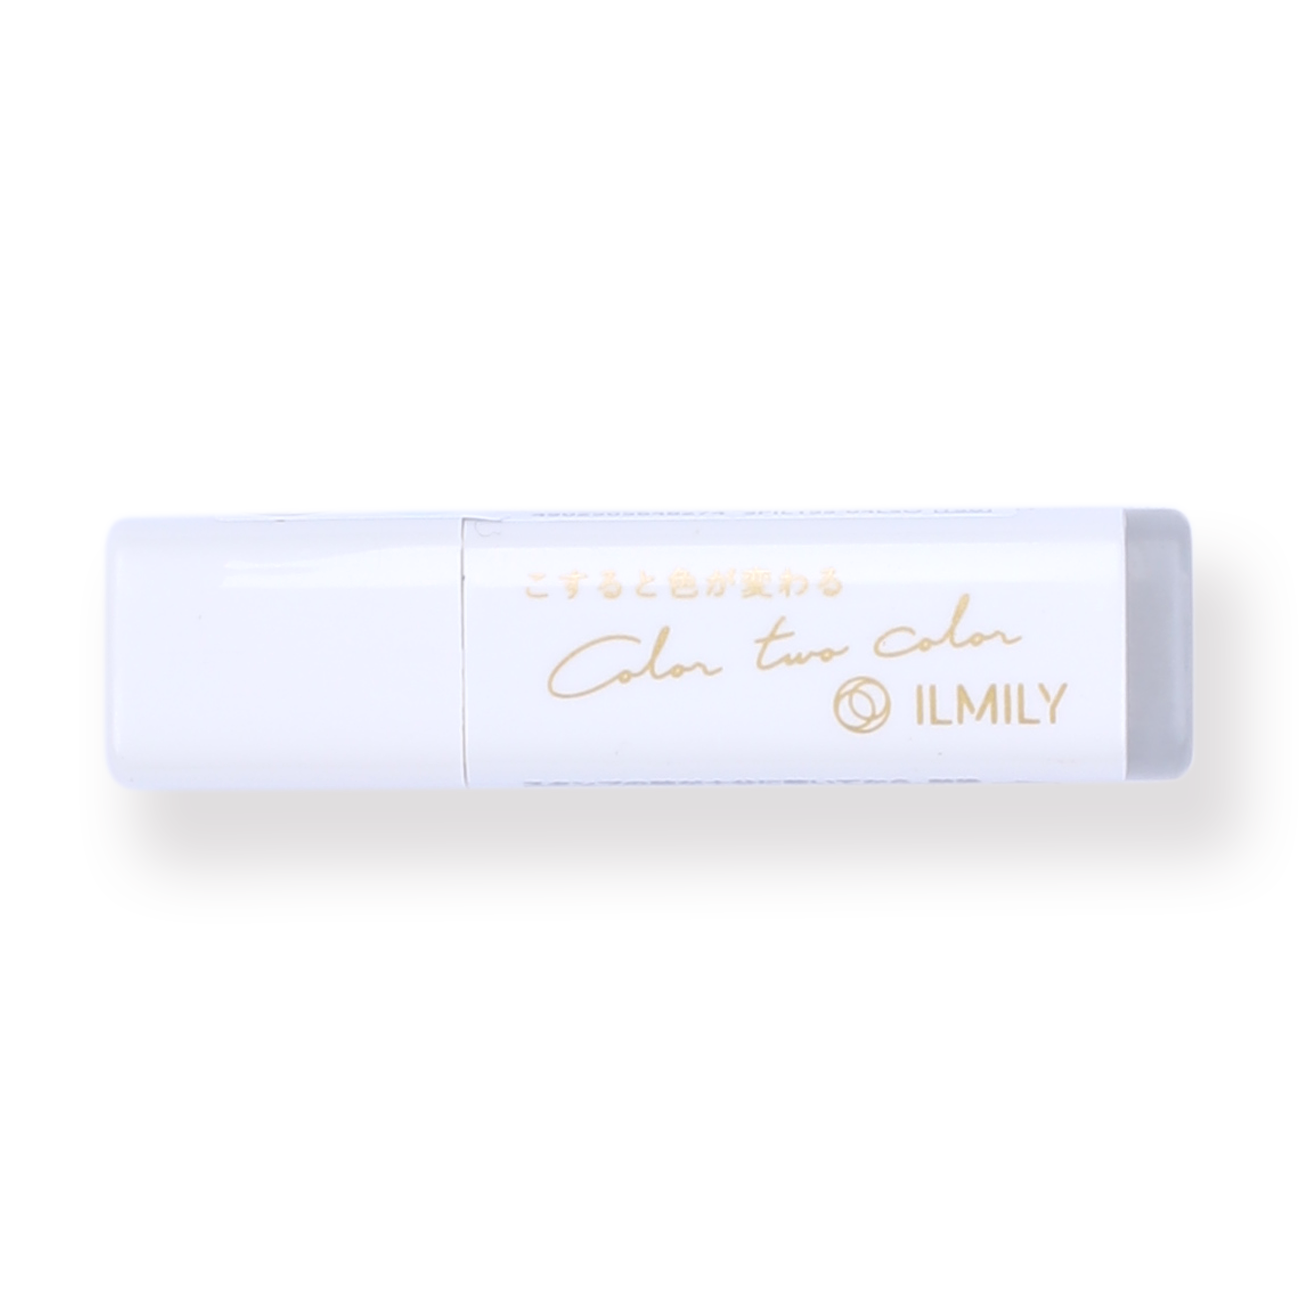 Pilot ILMILY Limited Edition Erasable Stamp - Gift Me - Stationery Pal